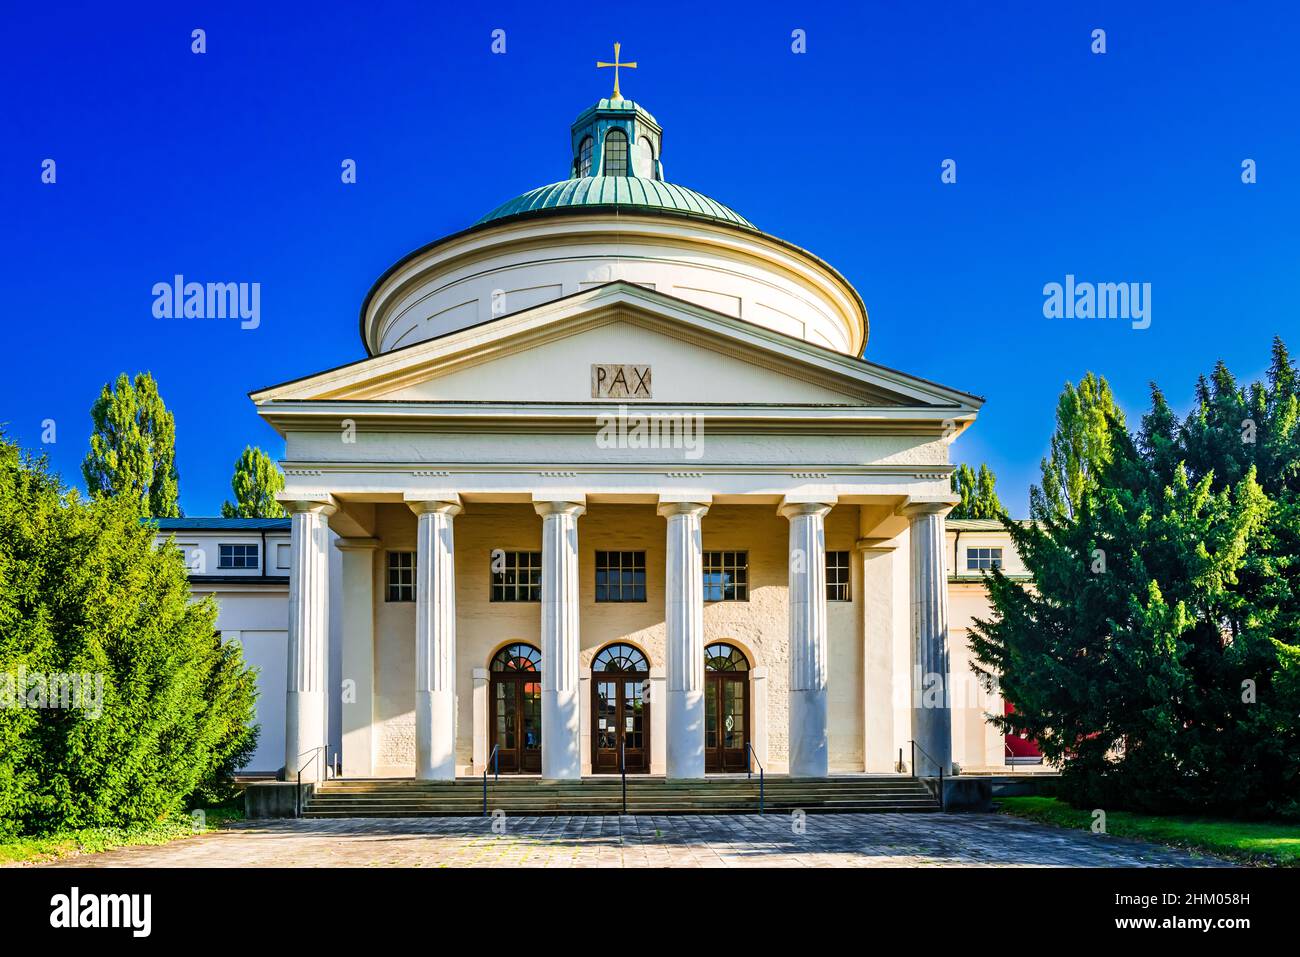 Munich, Germany - View on main building of Ostfriedhof cemetery Stock Photo